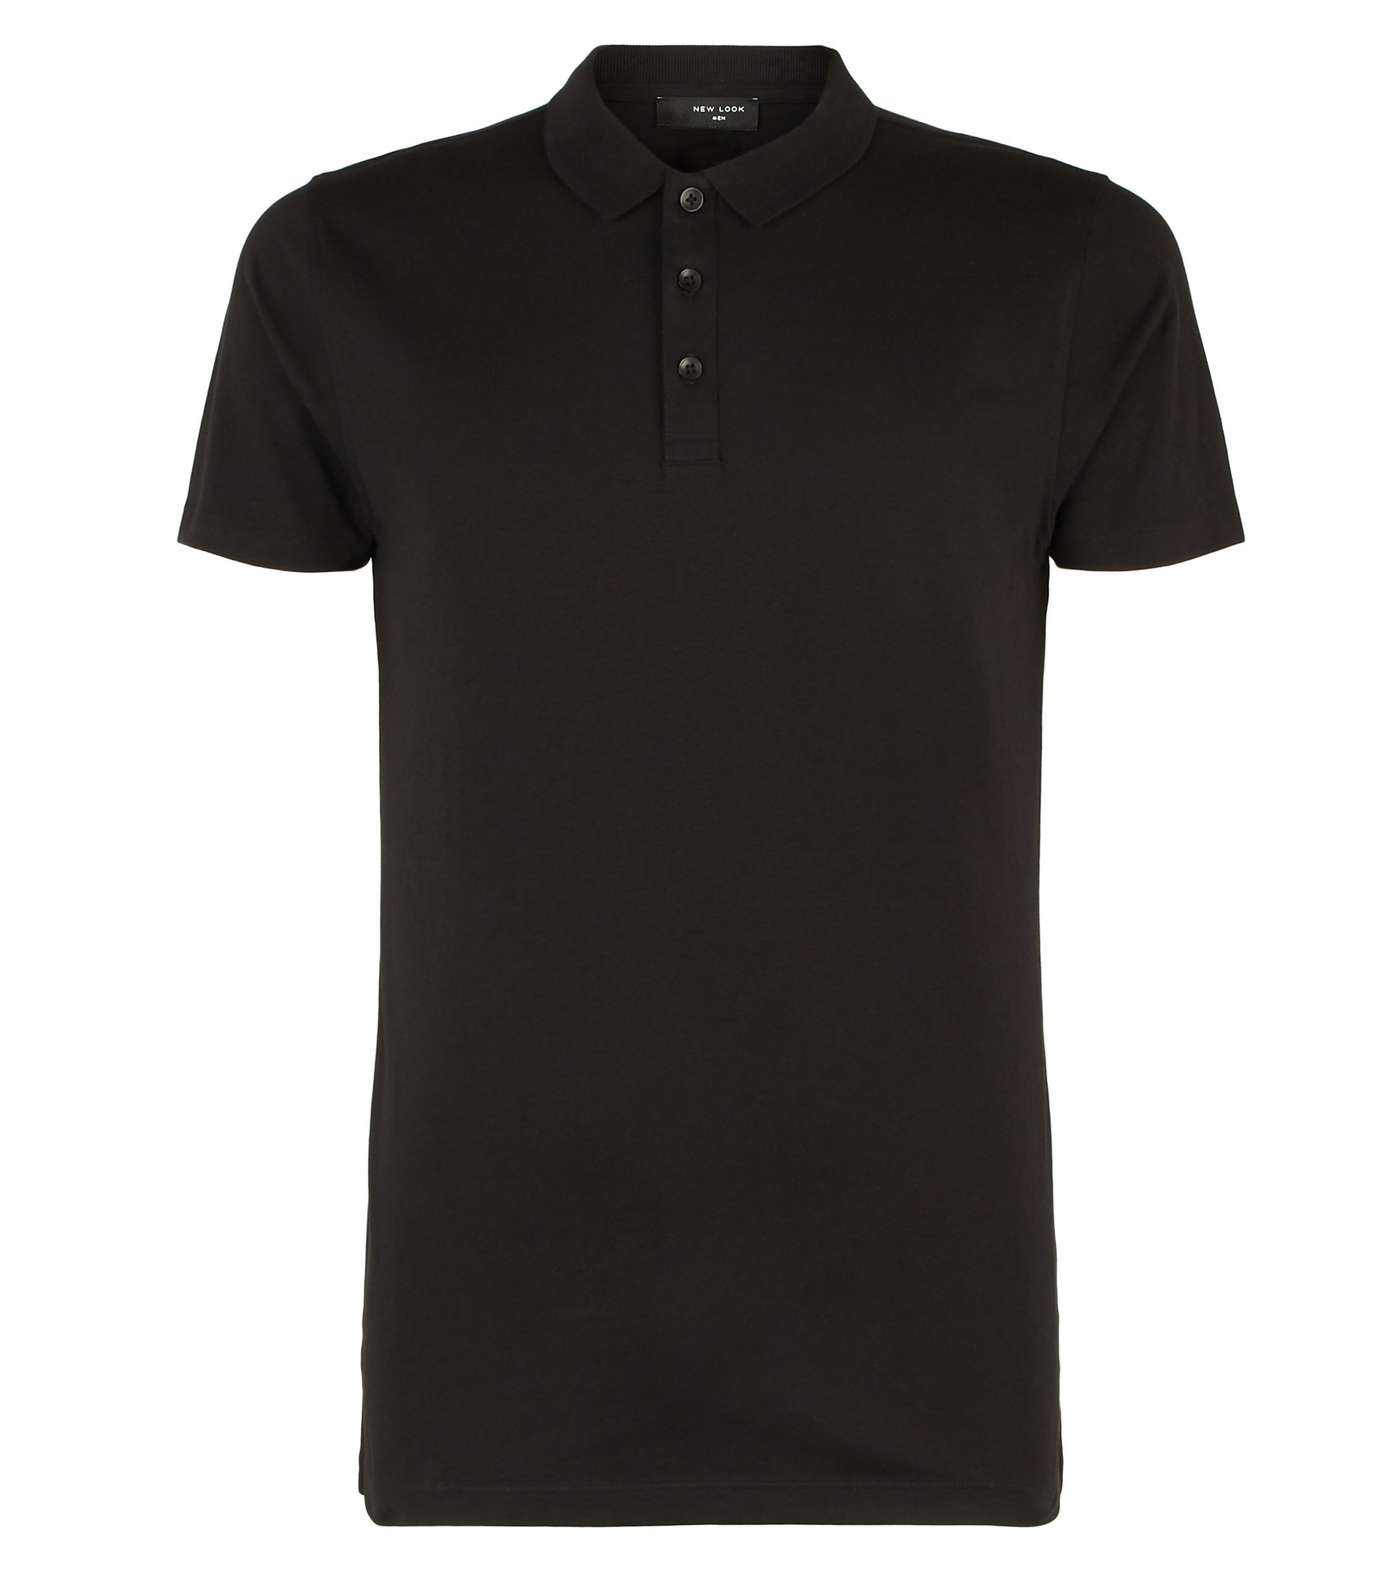 Black Muscle Fit Polo Shirt Image 4